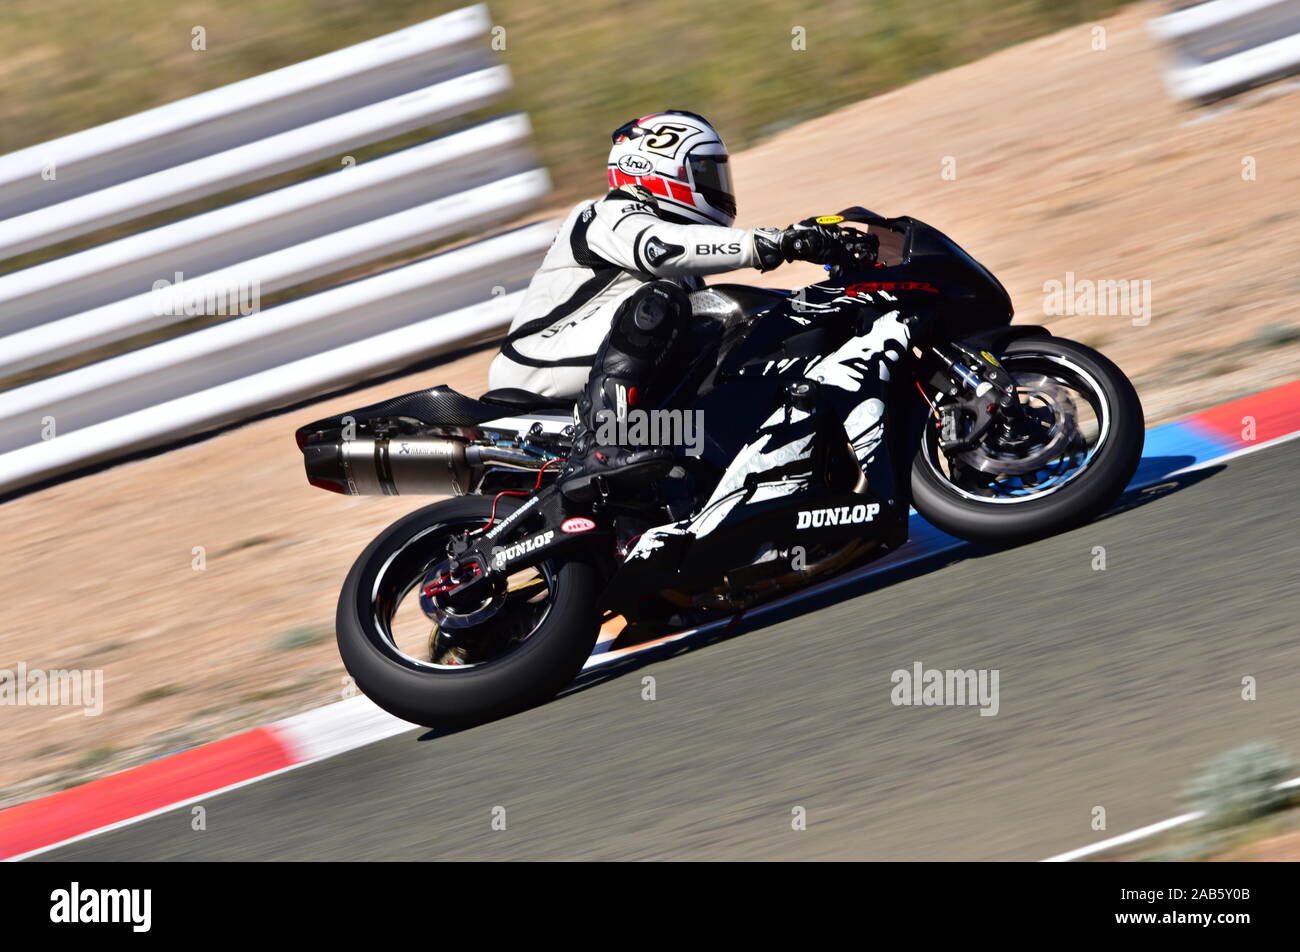 HONDA CBR600RR MOTORCYCLE AND DOING TRACKDAYS Stock Photo